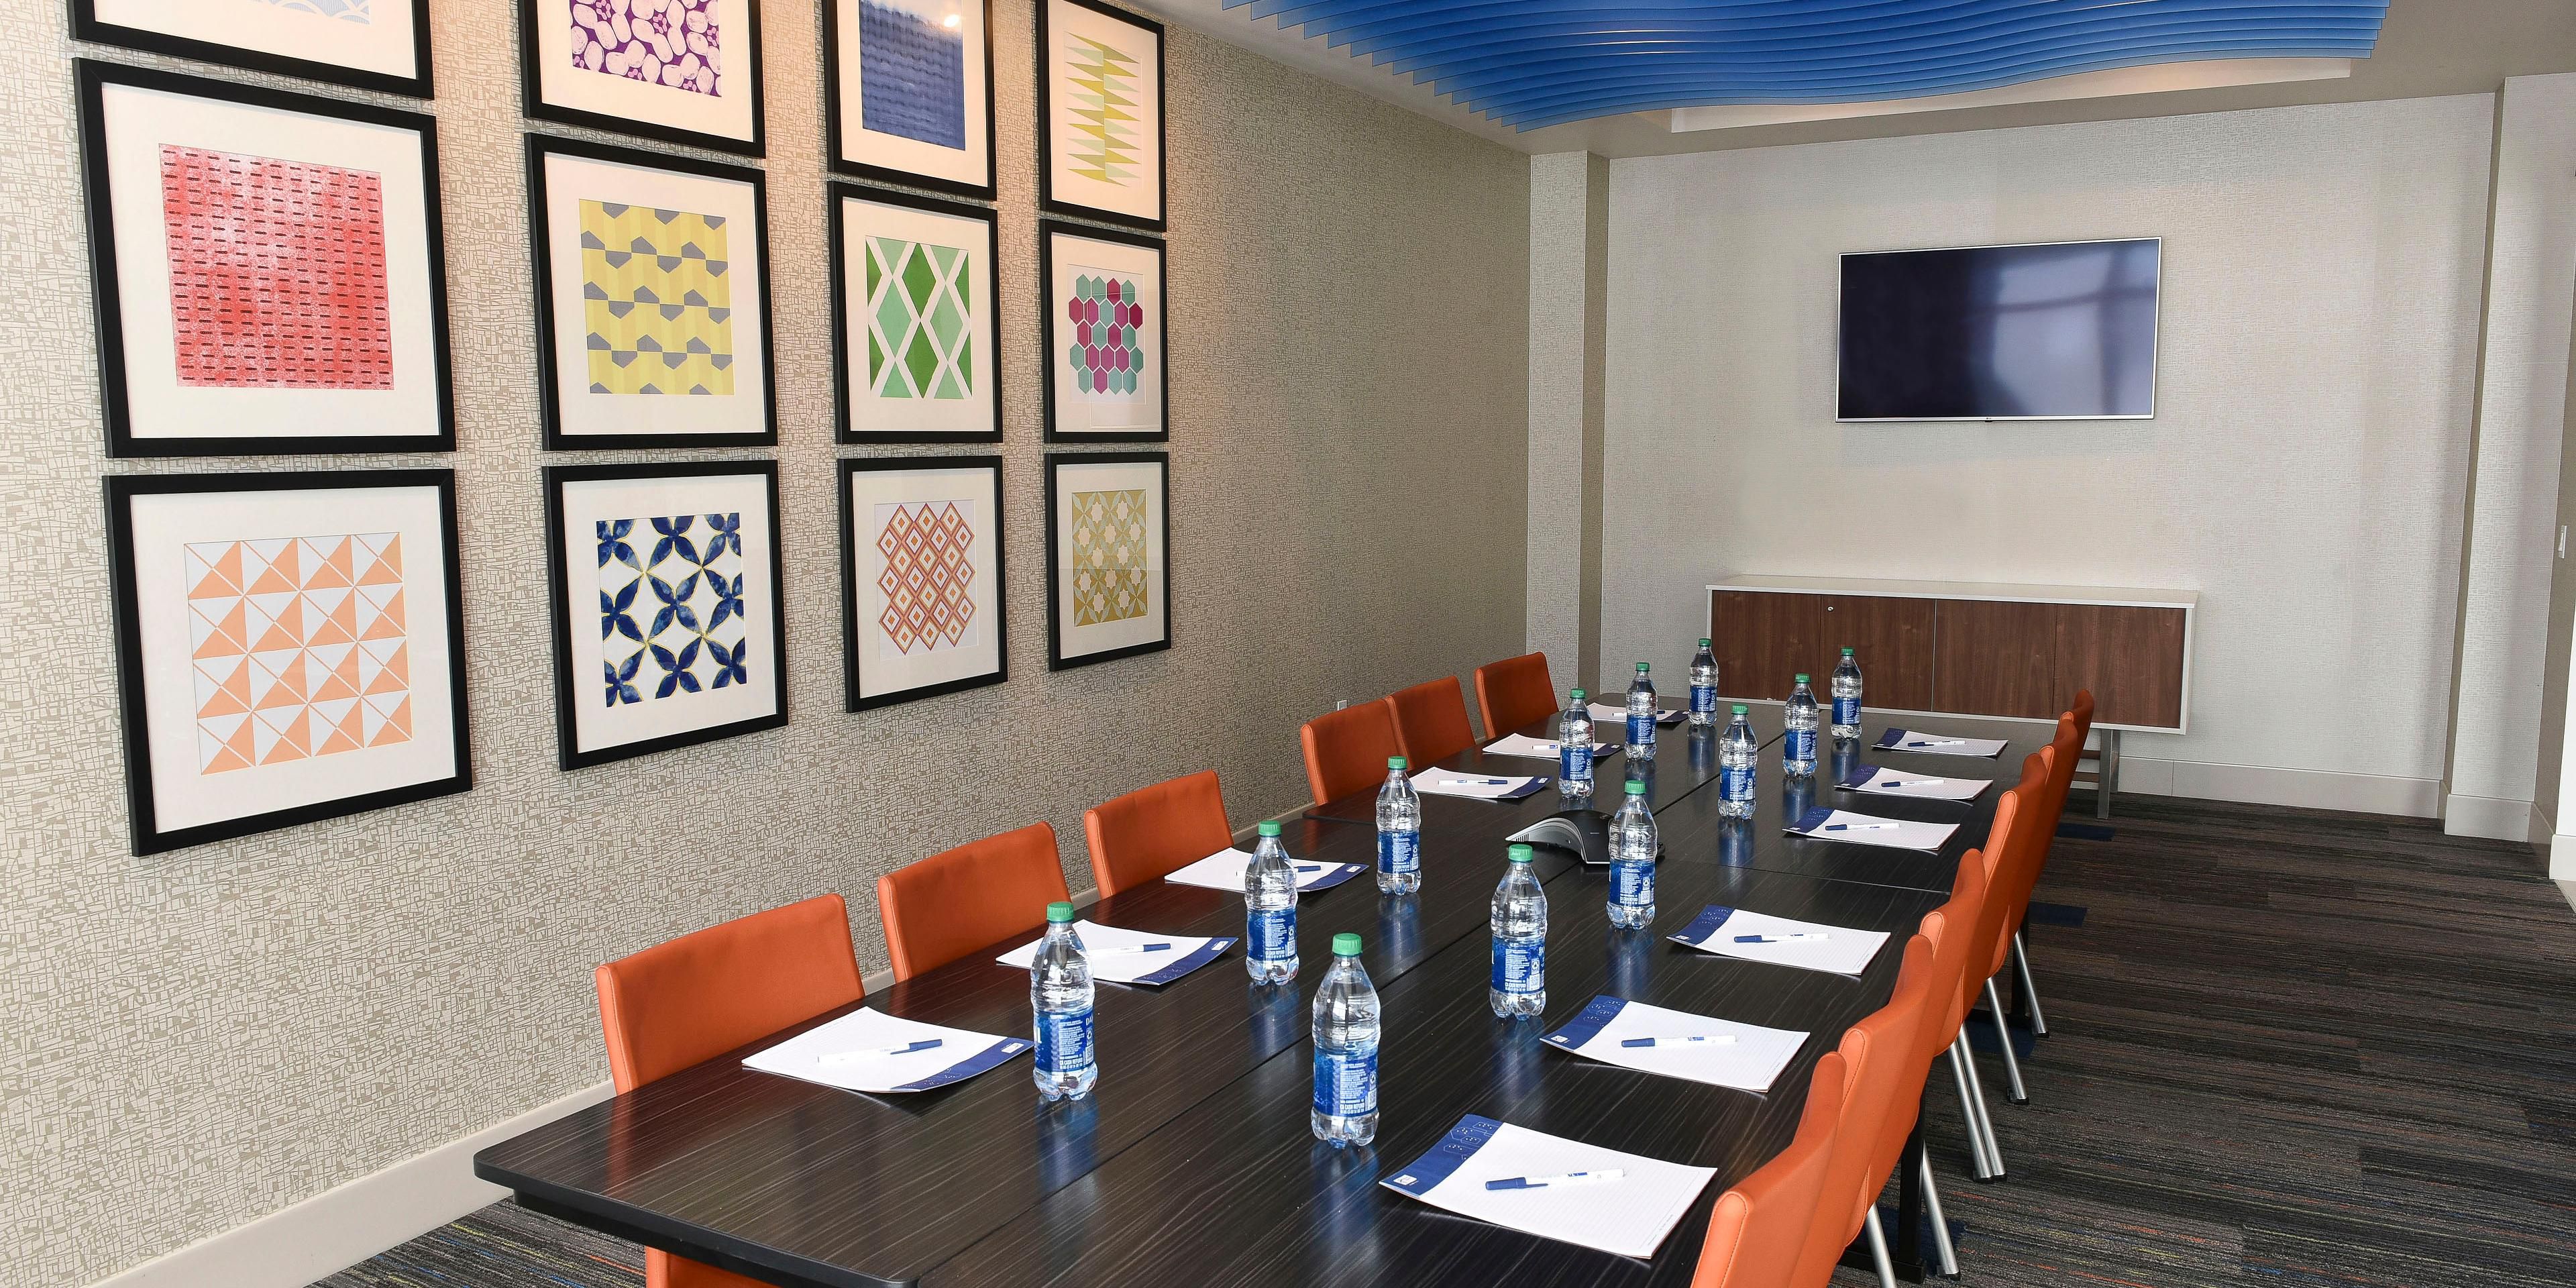 Elevate your meetings in our sophisticated space for up to 16. Equipped with a conference phone and TV for seamless presentations, it's the ideal setting to enhance communication and productivity for your team.